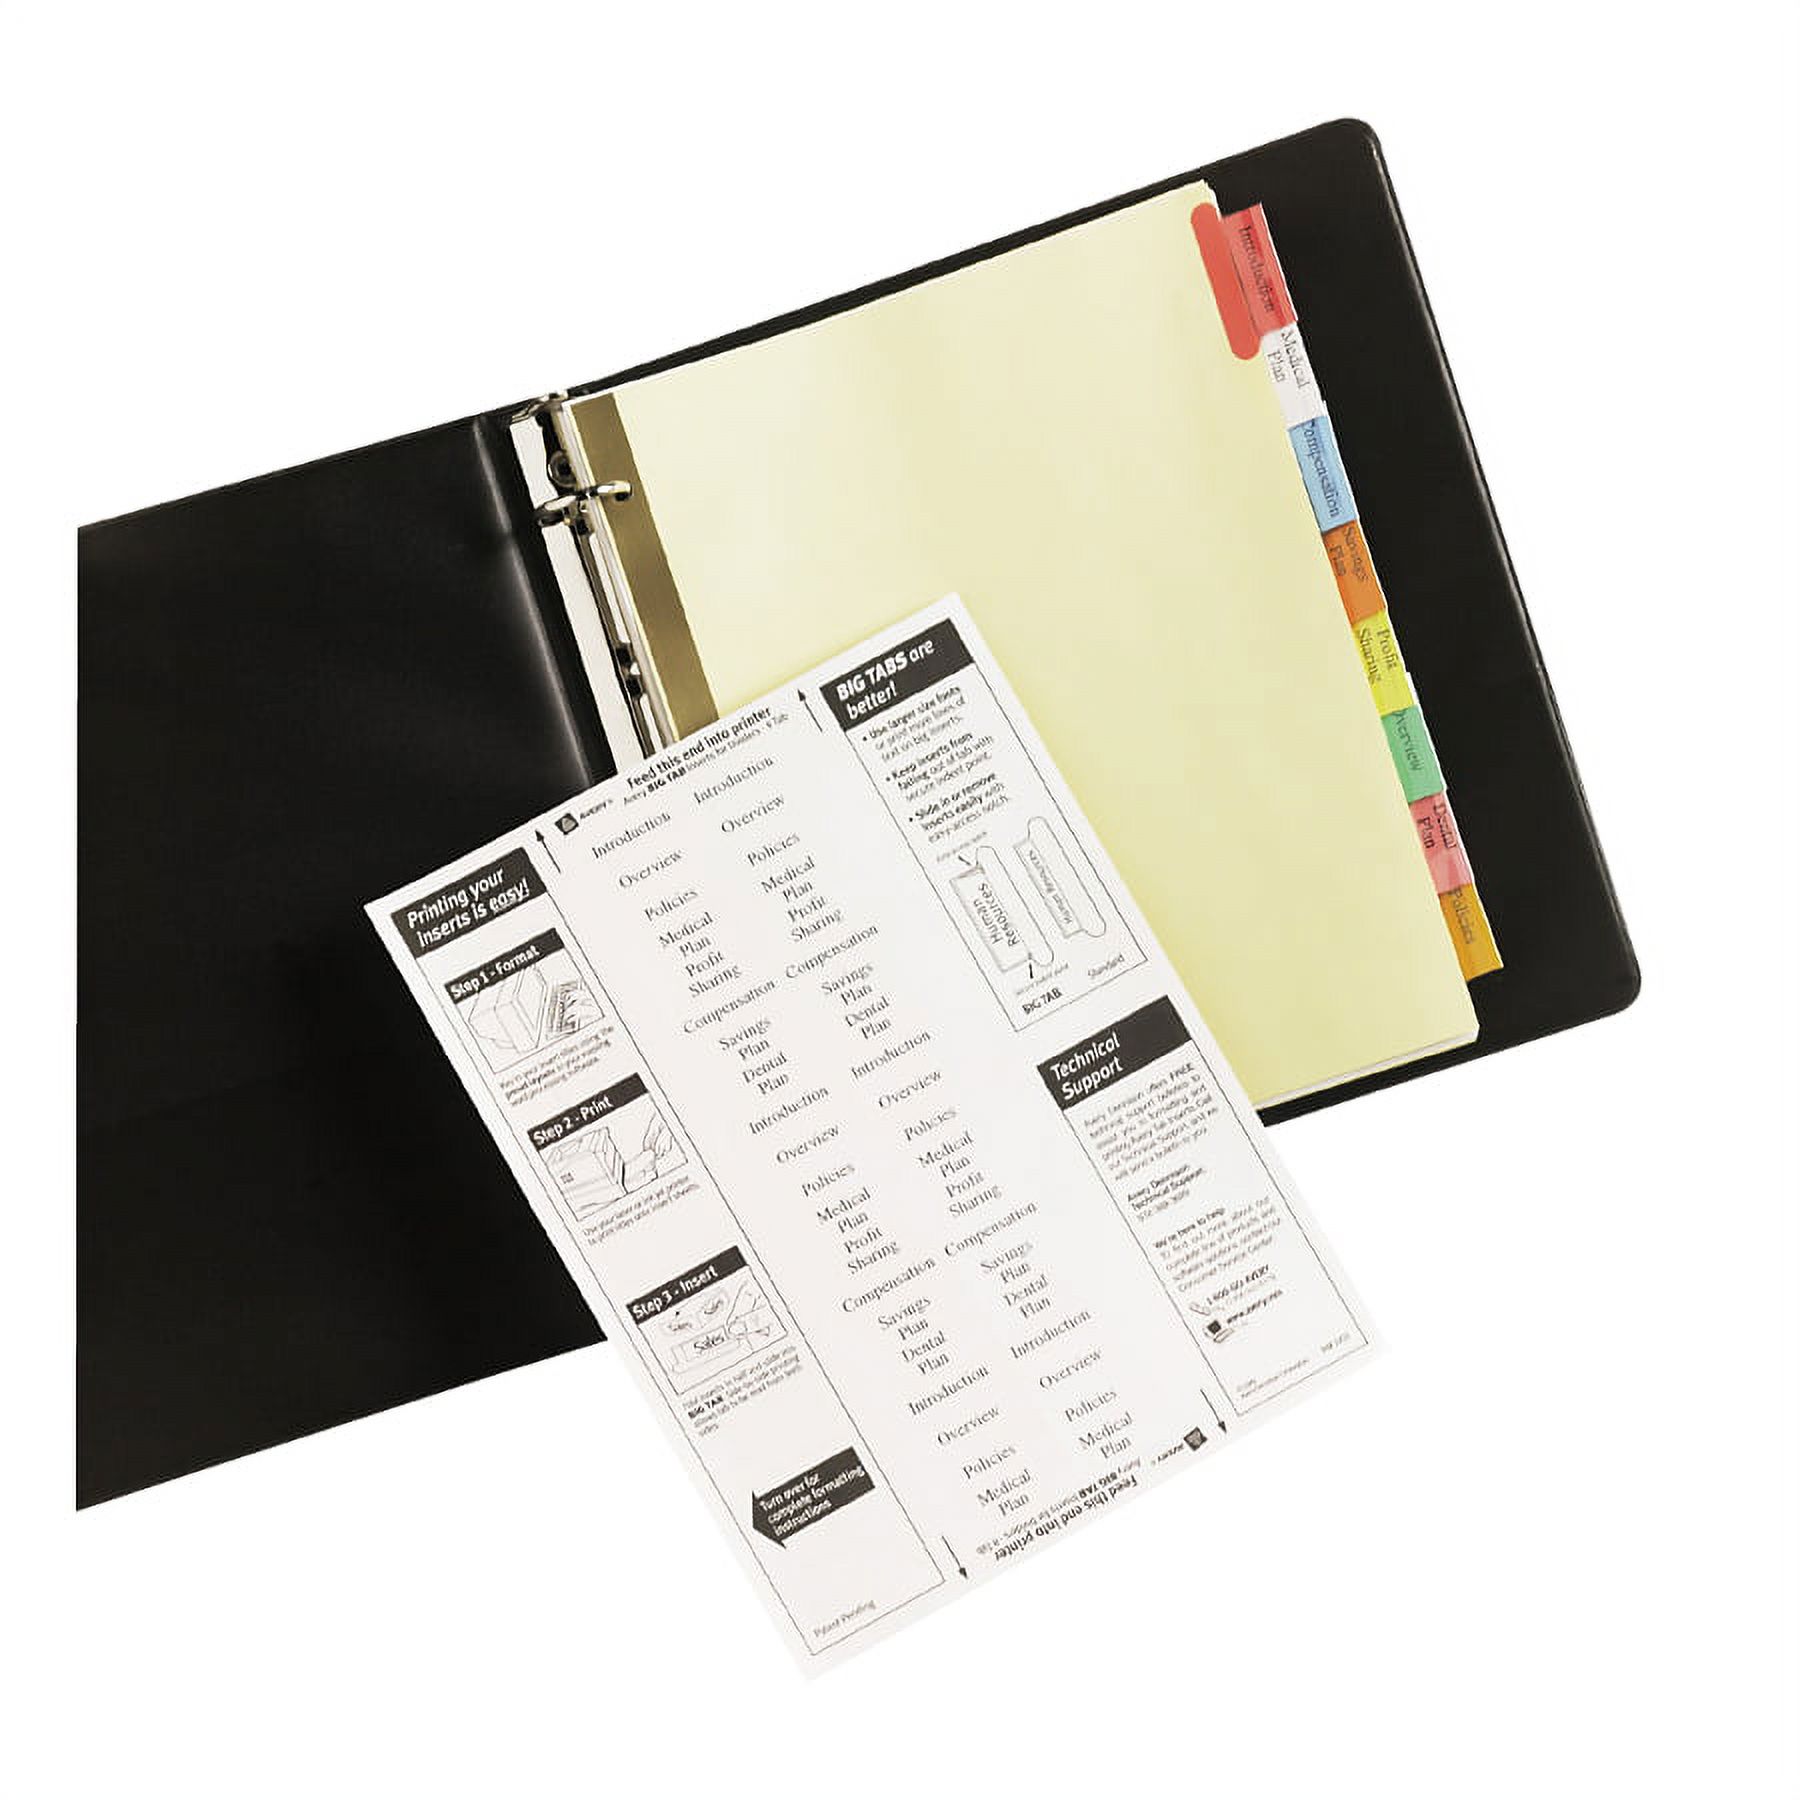 Avery Big Tab Insertable Dividers, Buff Paper, Multicolor Tabs, 8-Tab Set (11111) - image 4 of 4